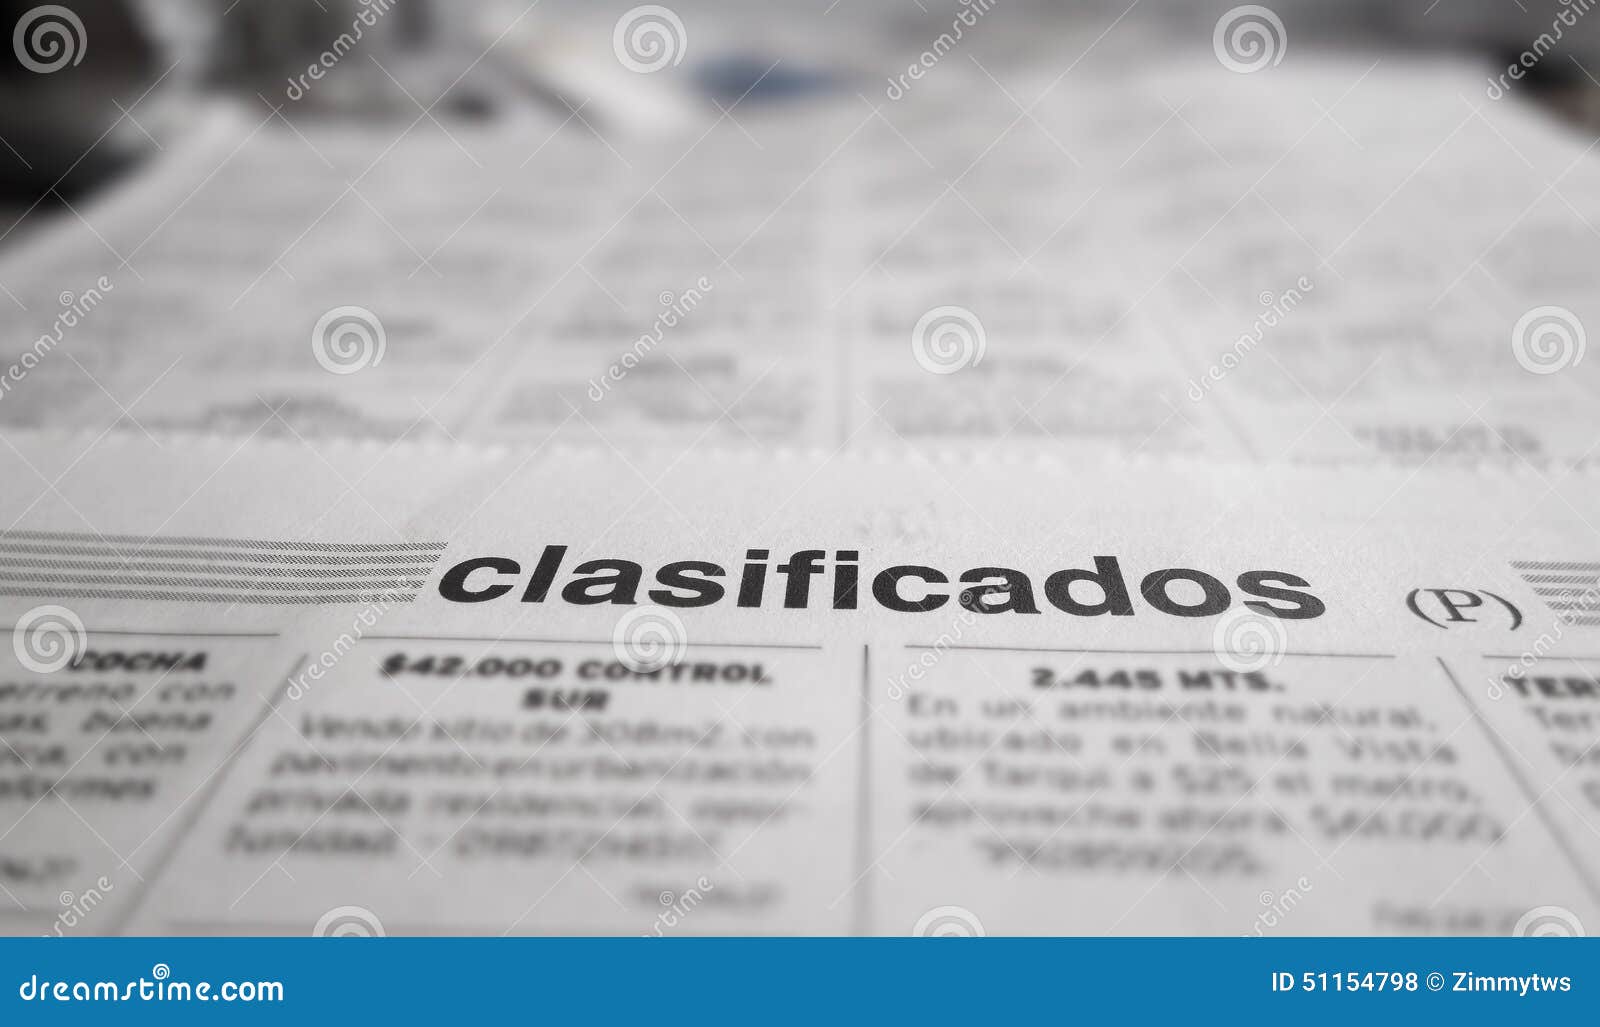 newspaper classified section